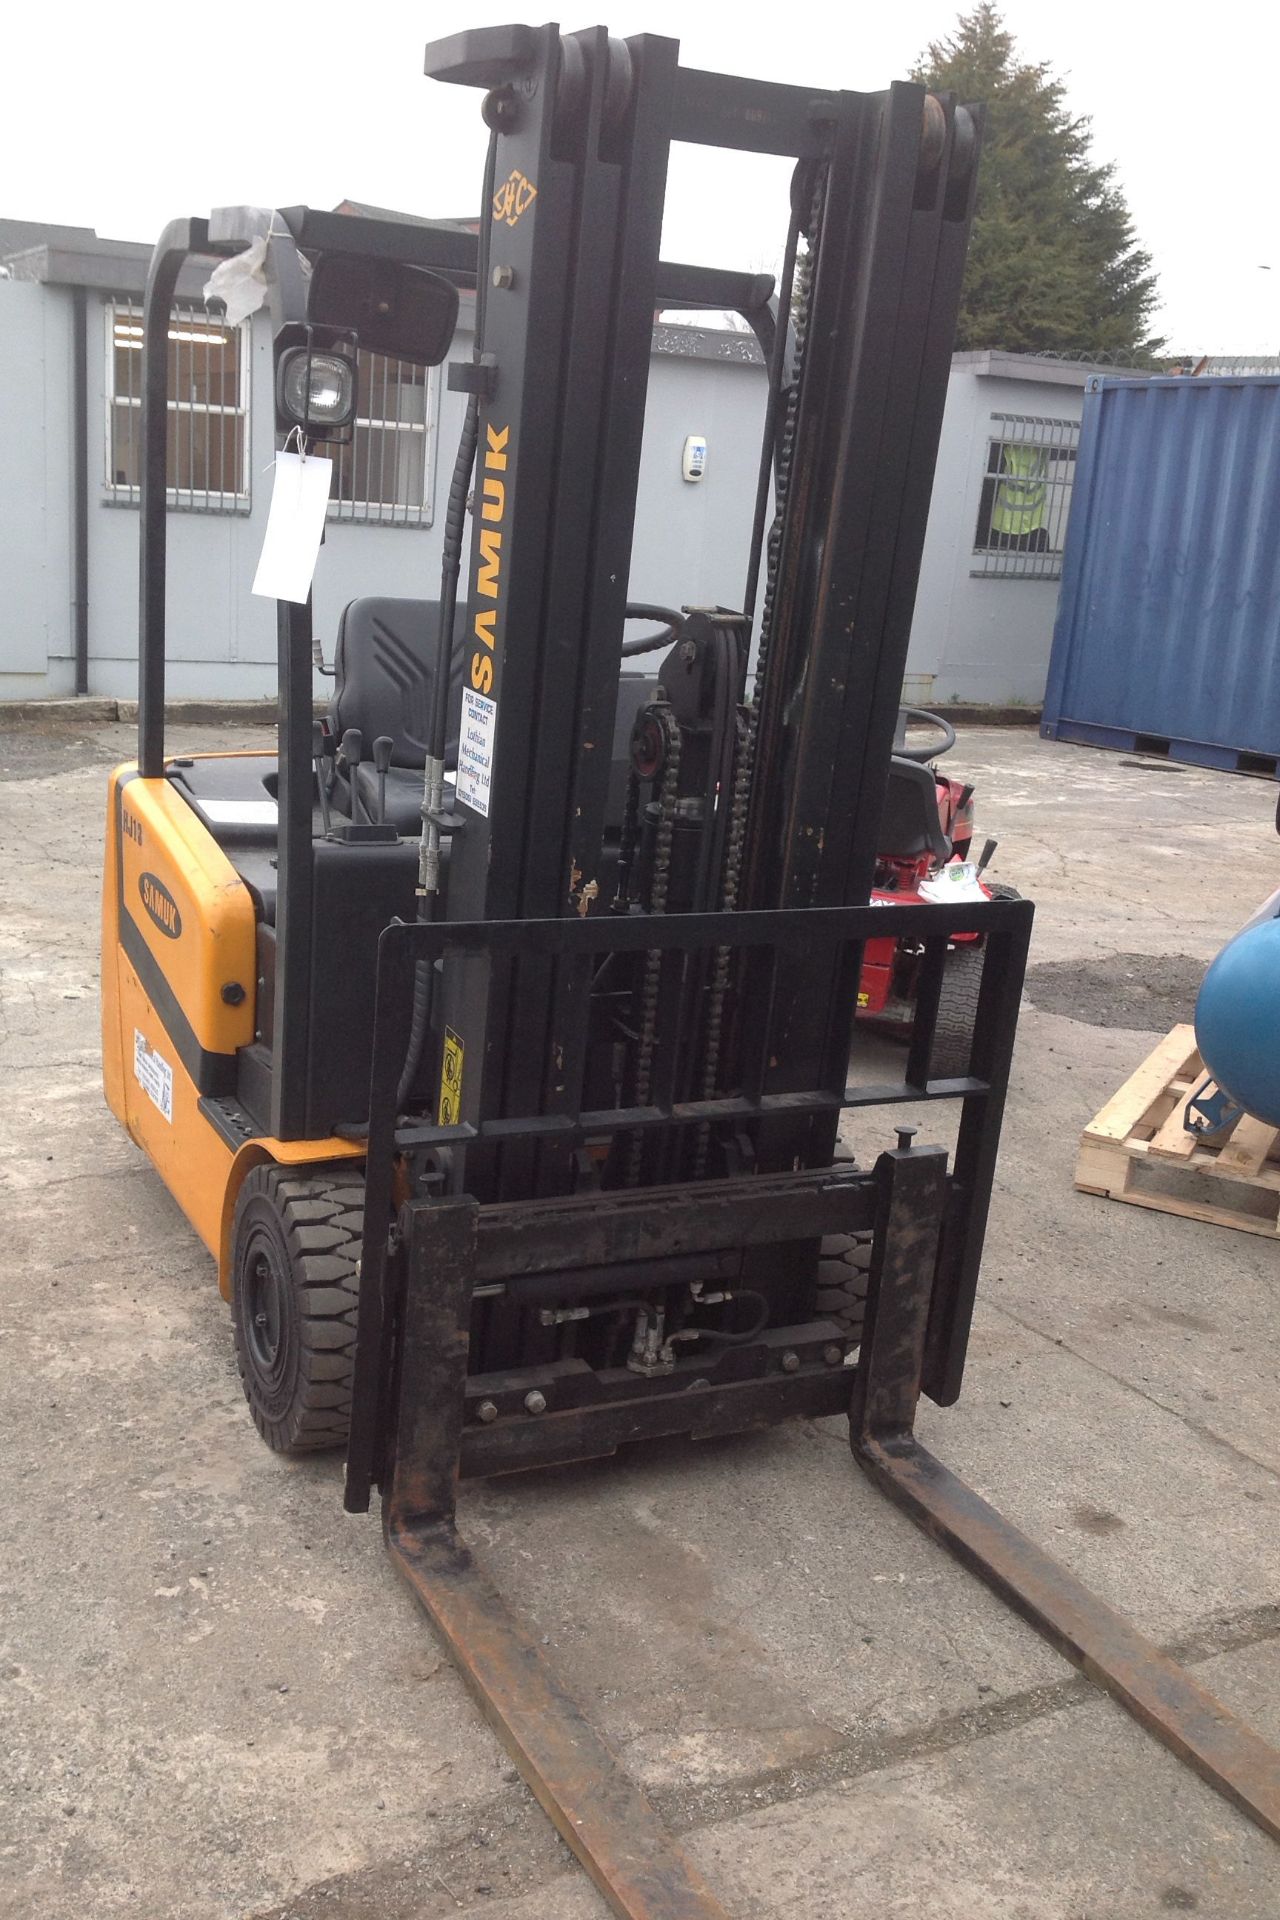 A Samuk HJ13E Electric Fork Lift Truck No.060100833 (2006), 1300kg capacity, 3 stage Mast,